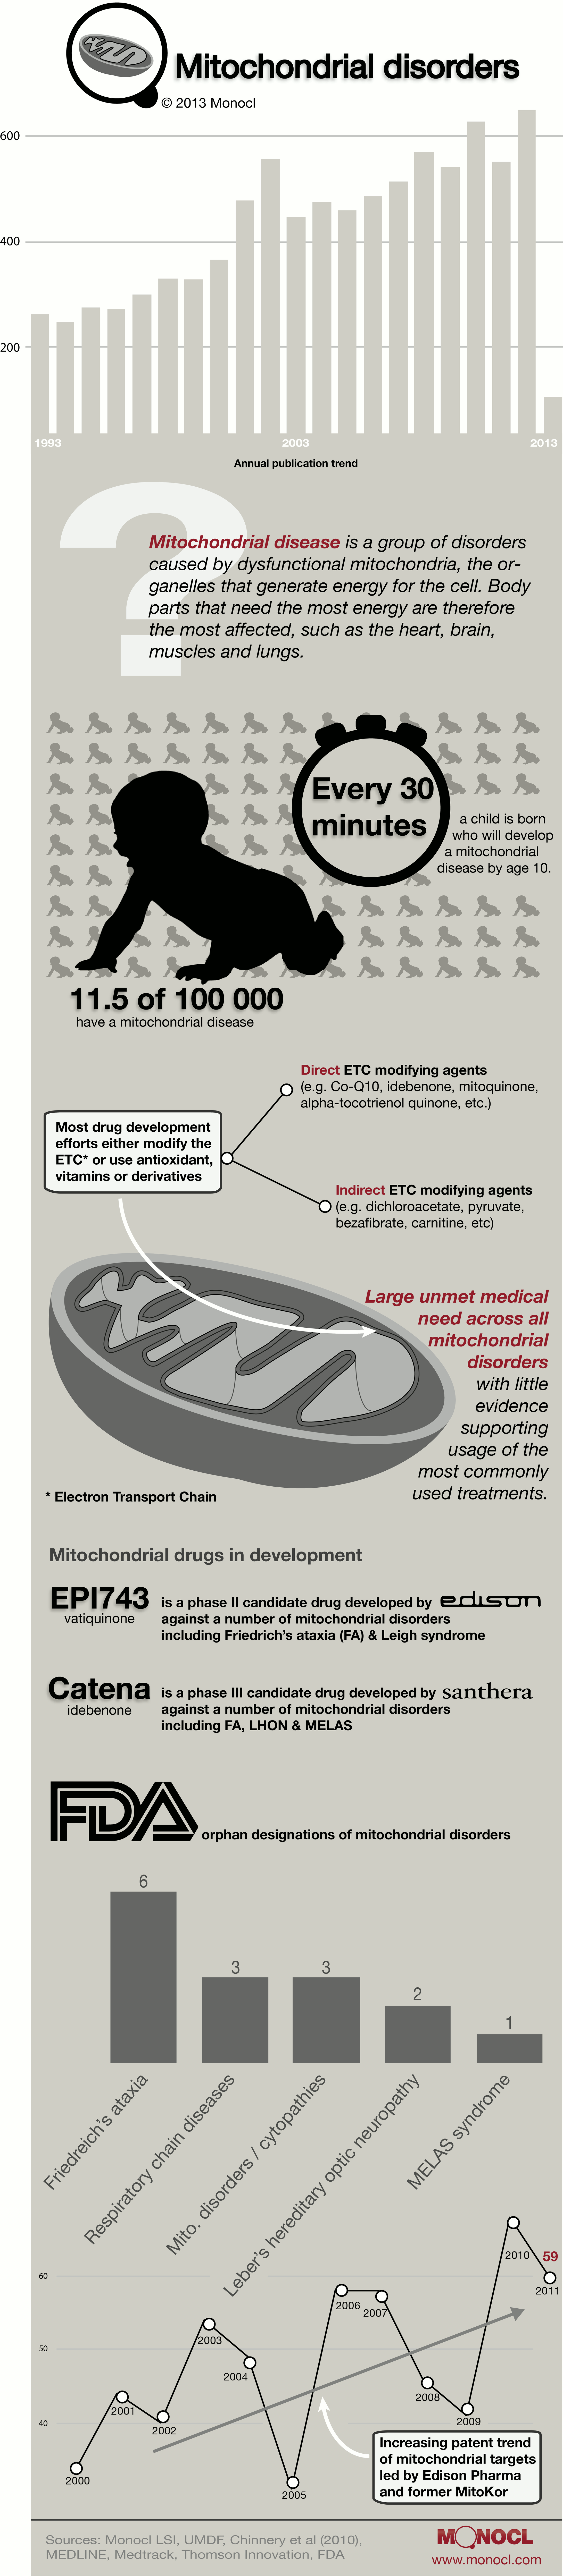 Mitochondrial Disease Facts